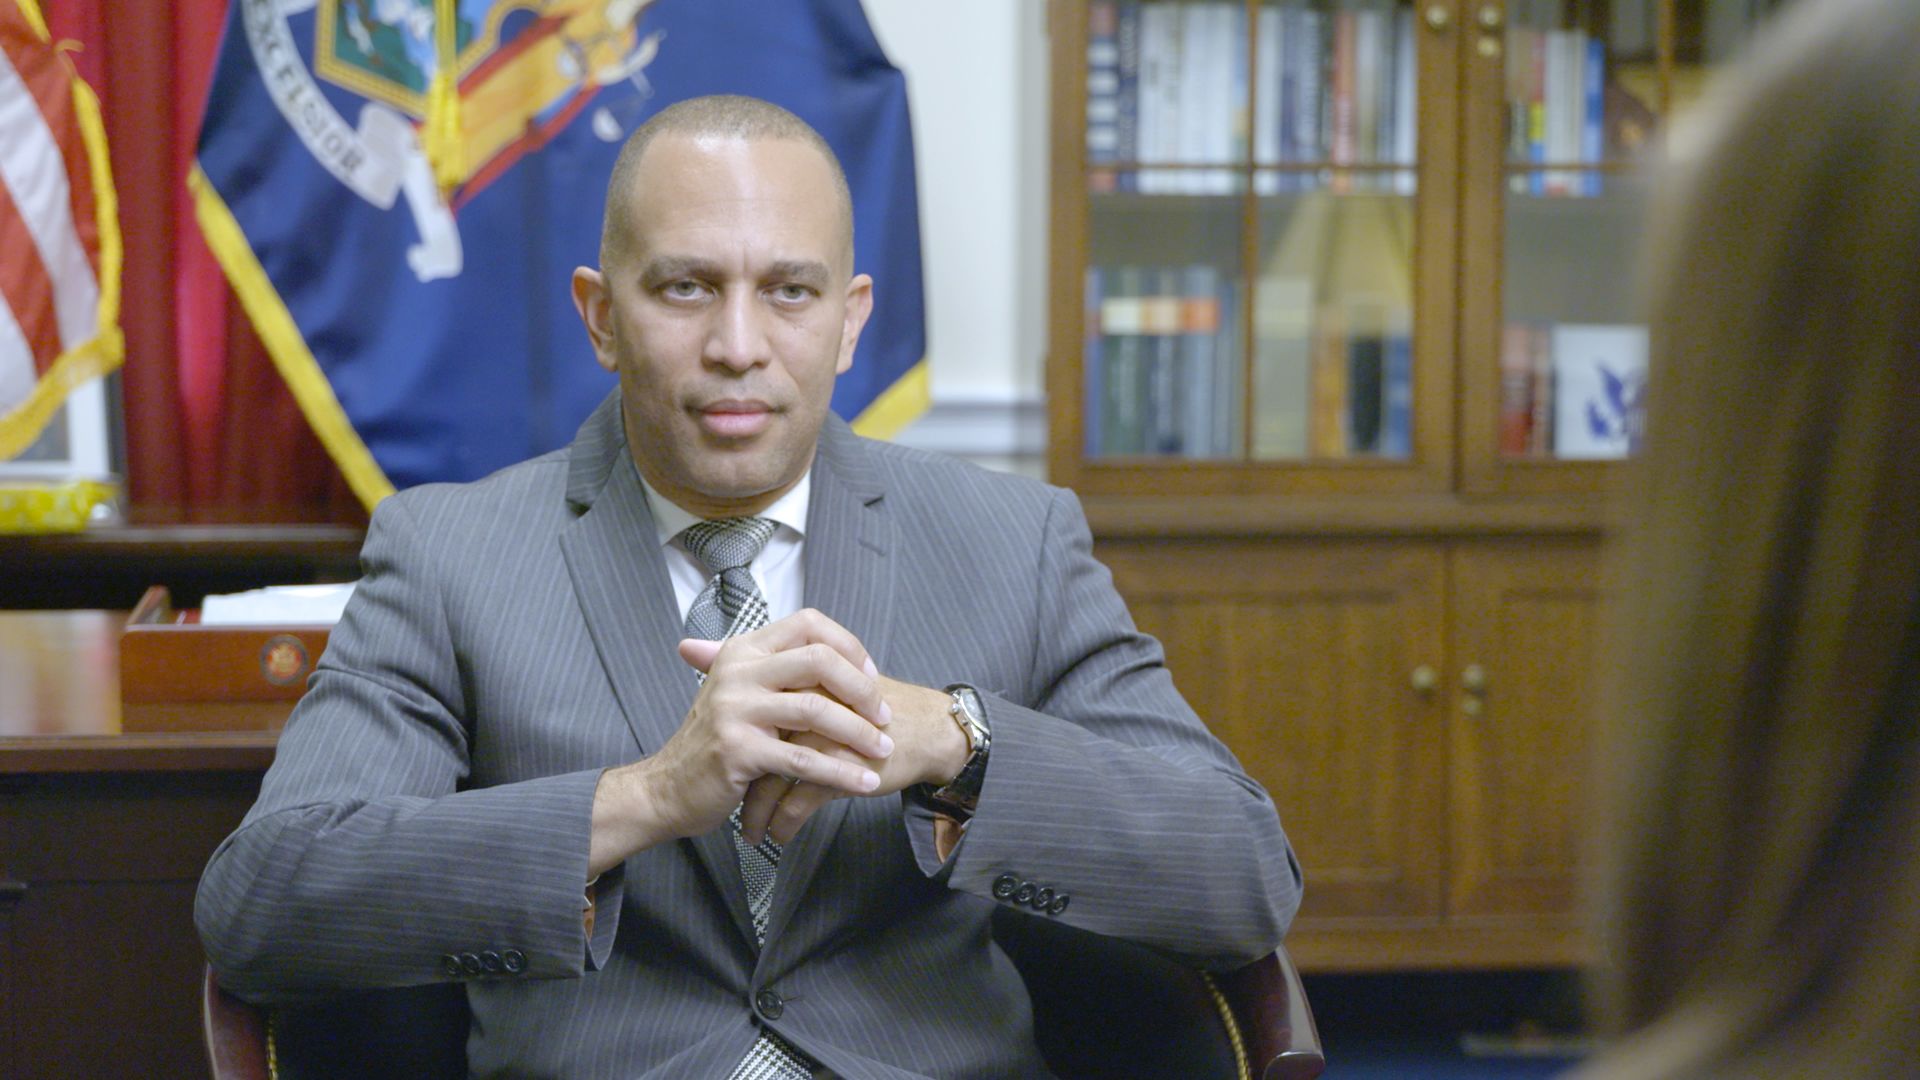 Rep. Hakeem Jeffries is seen during an interview with 